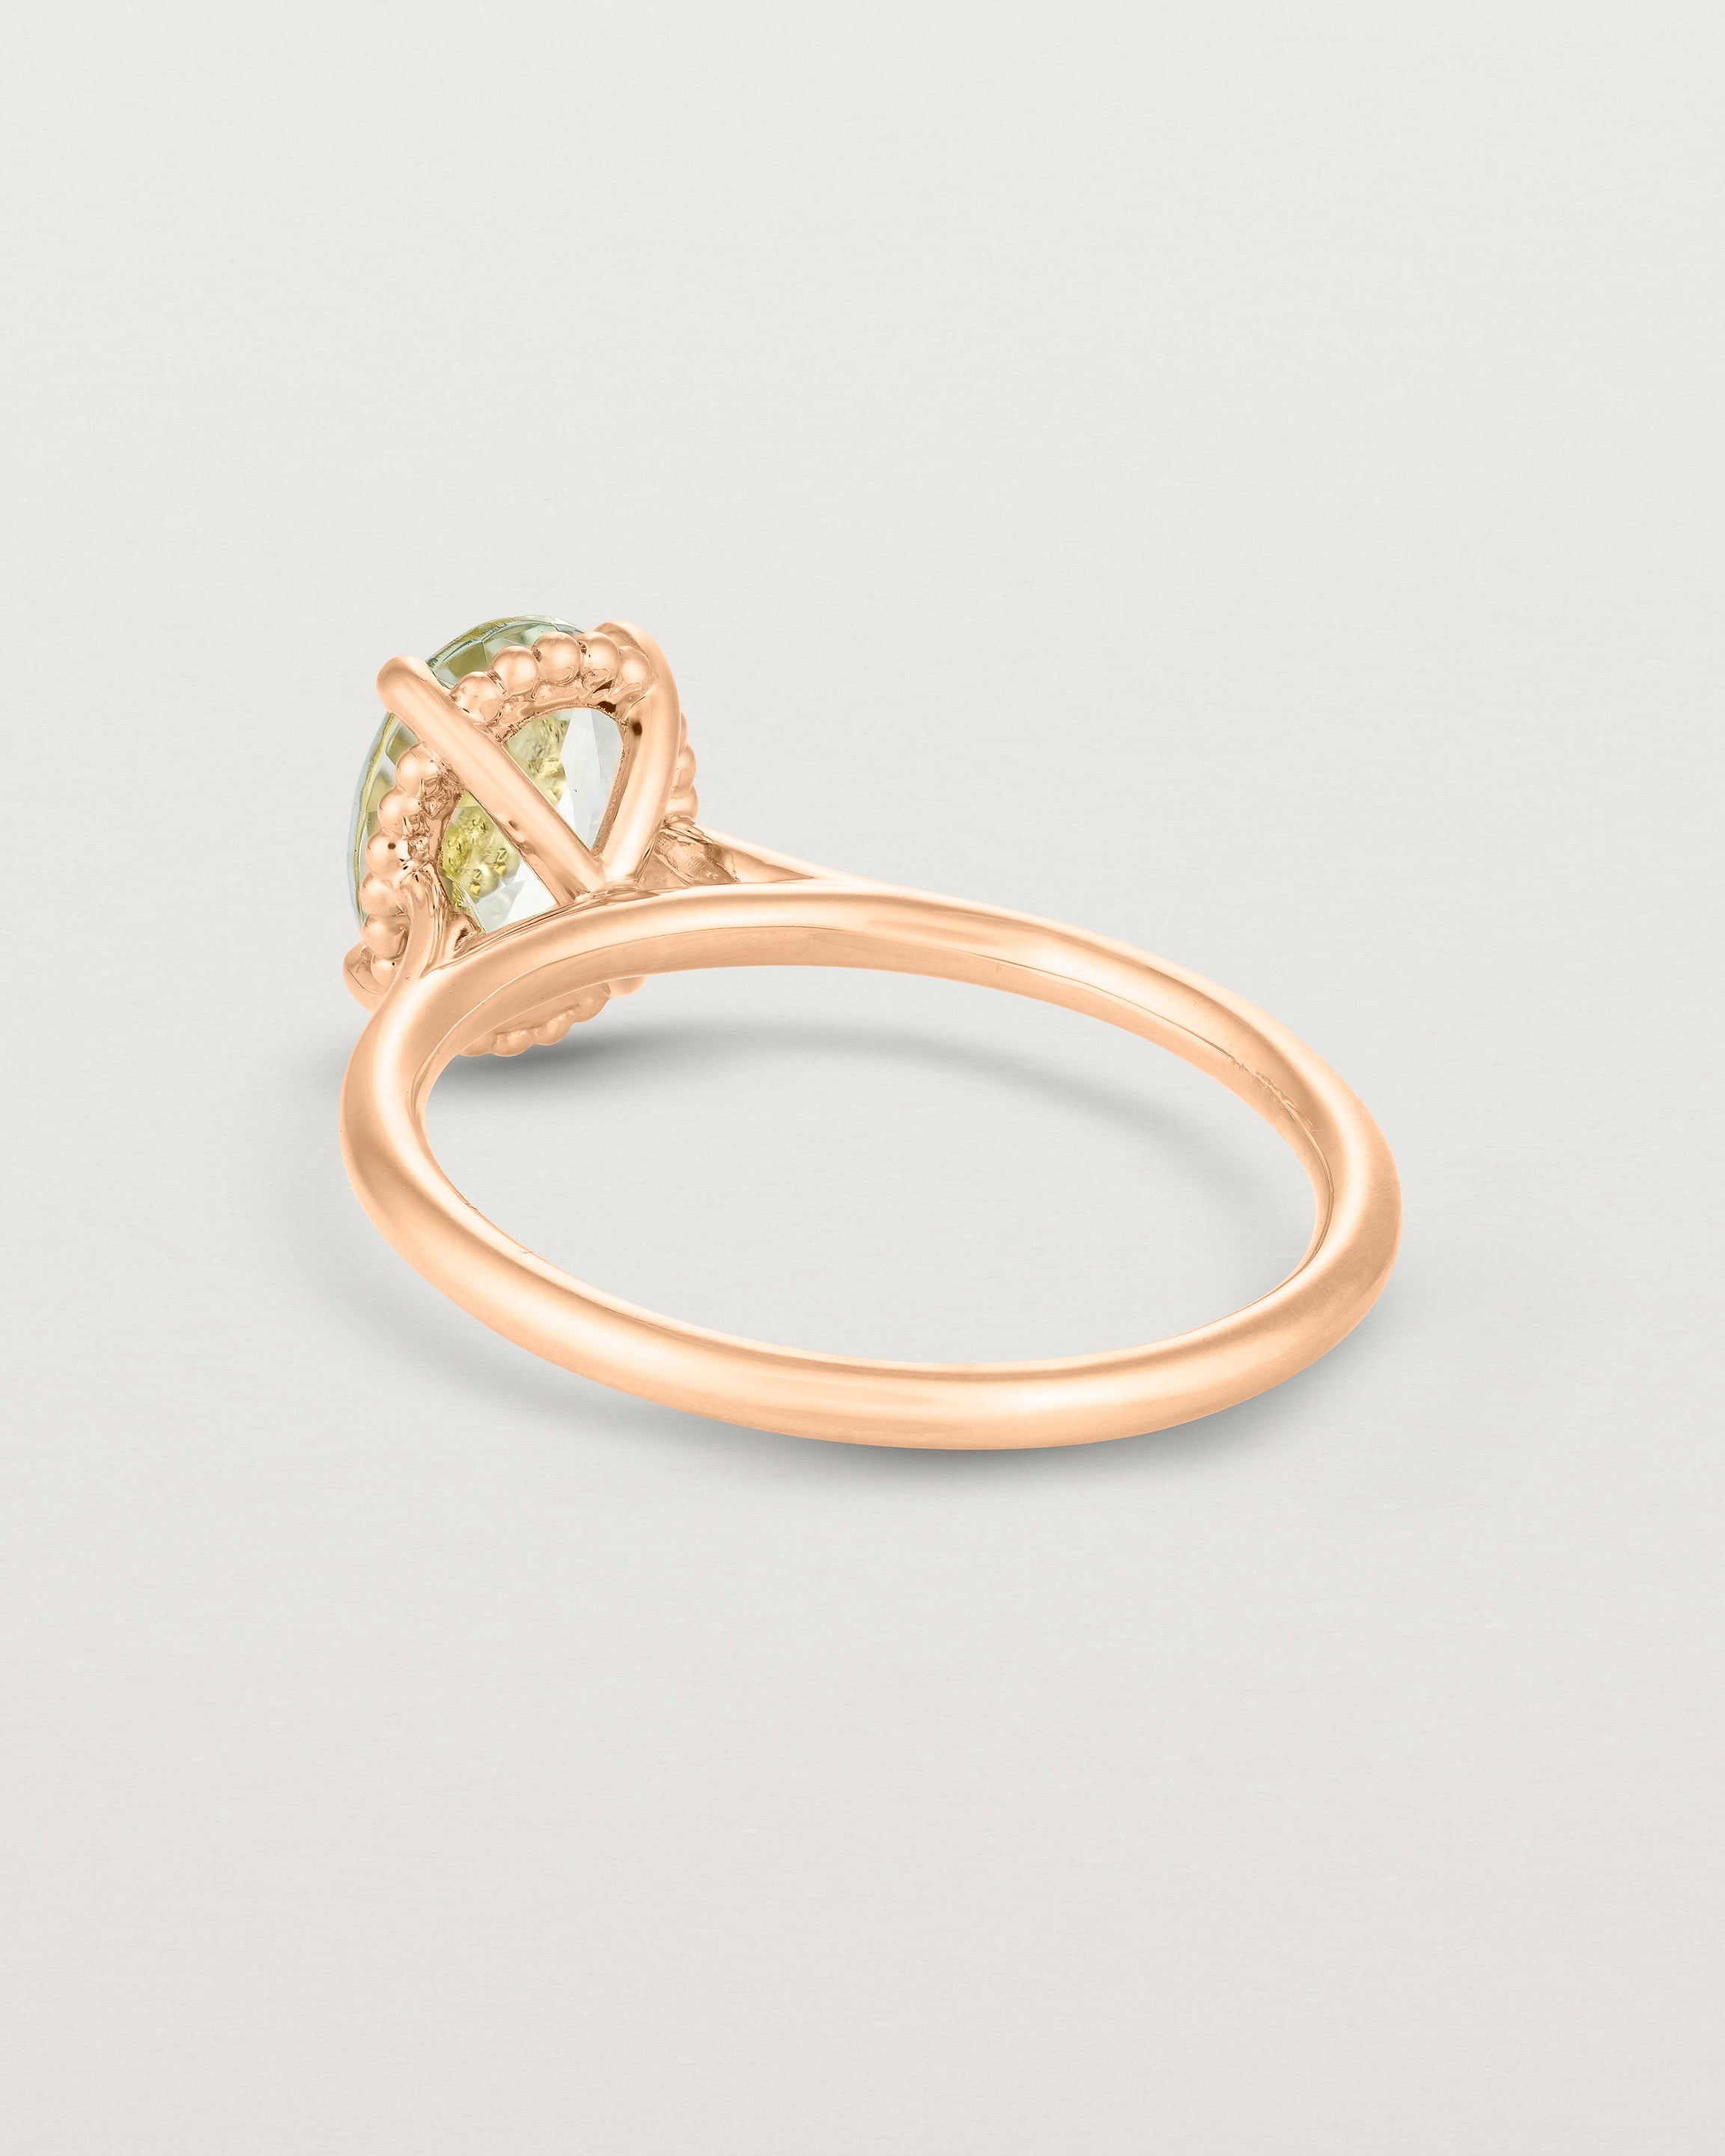 Back view of the Thea Oval Solitaire | Green Amethyst in rose gold.